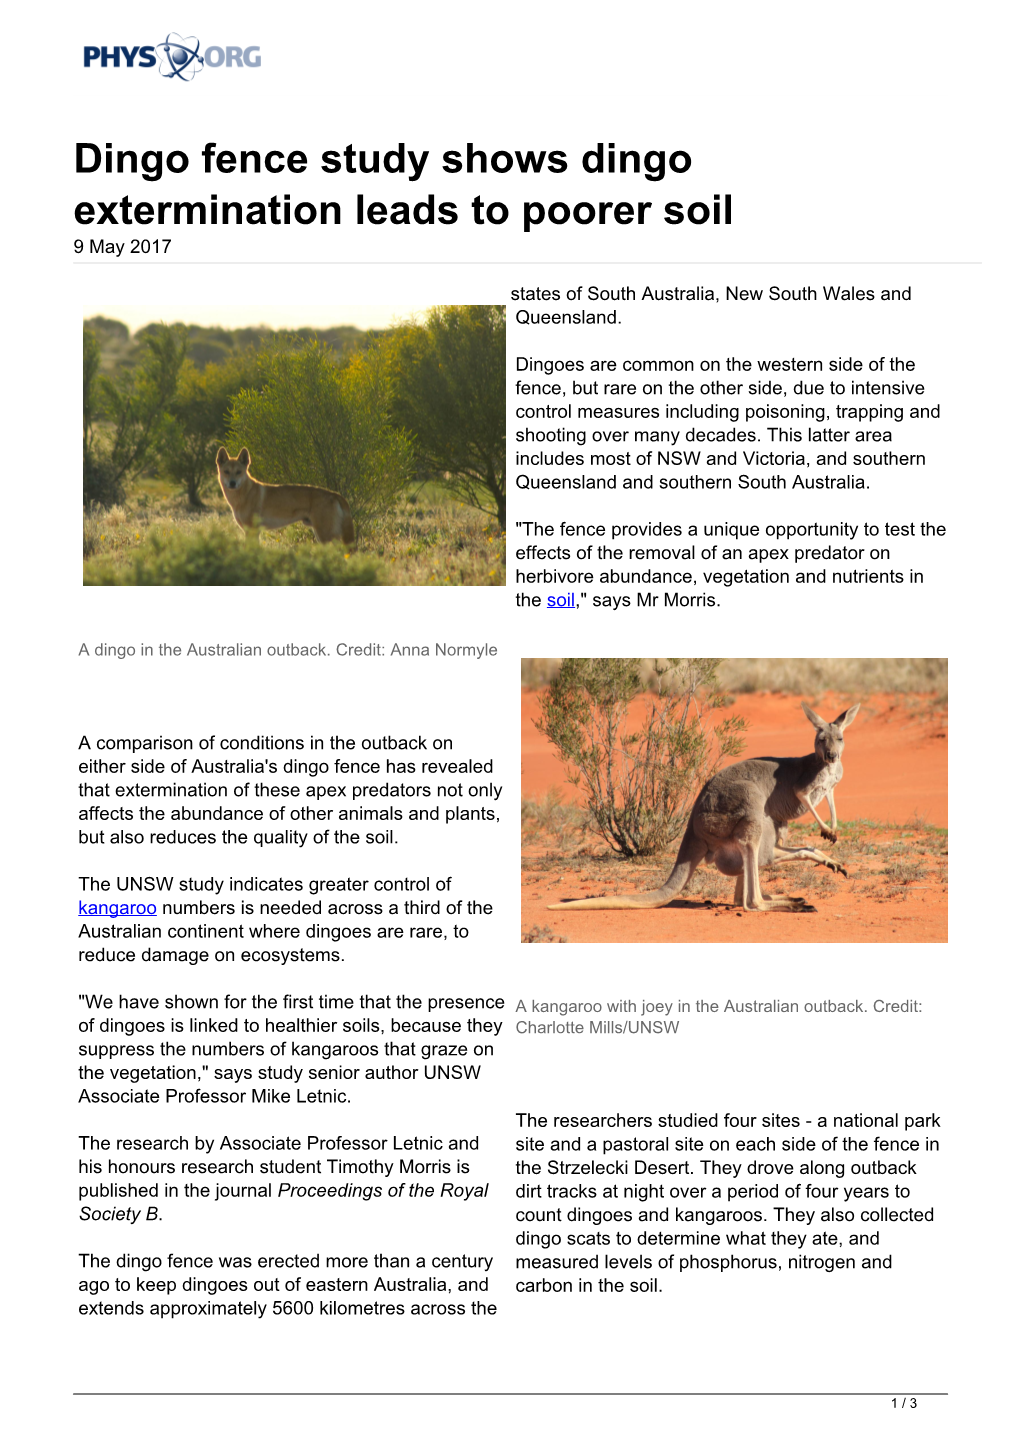 Dingo Fence Study Shows Dingo Extermination Leads to Poorer Soil 9 May 2017